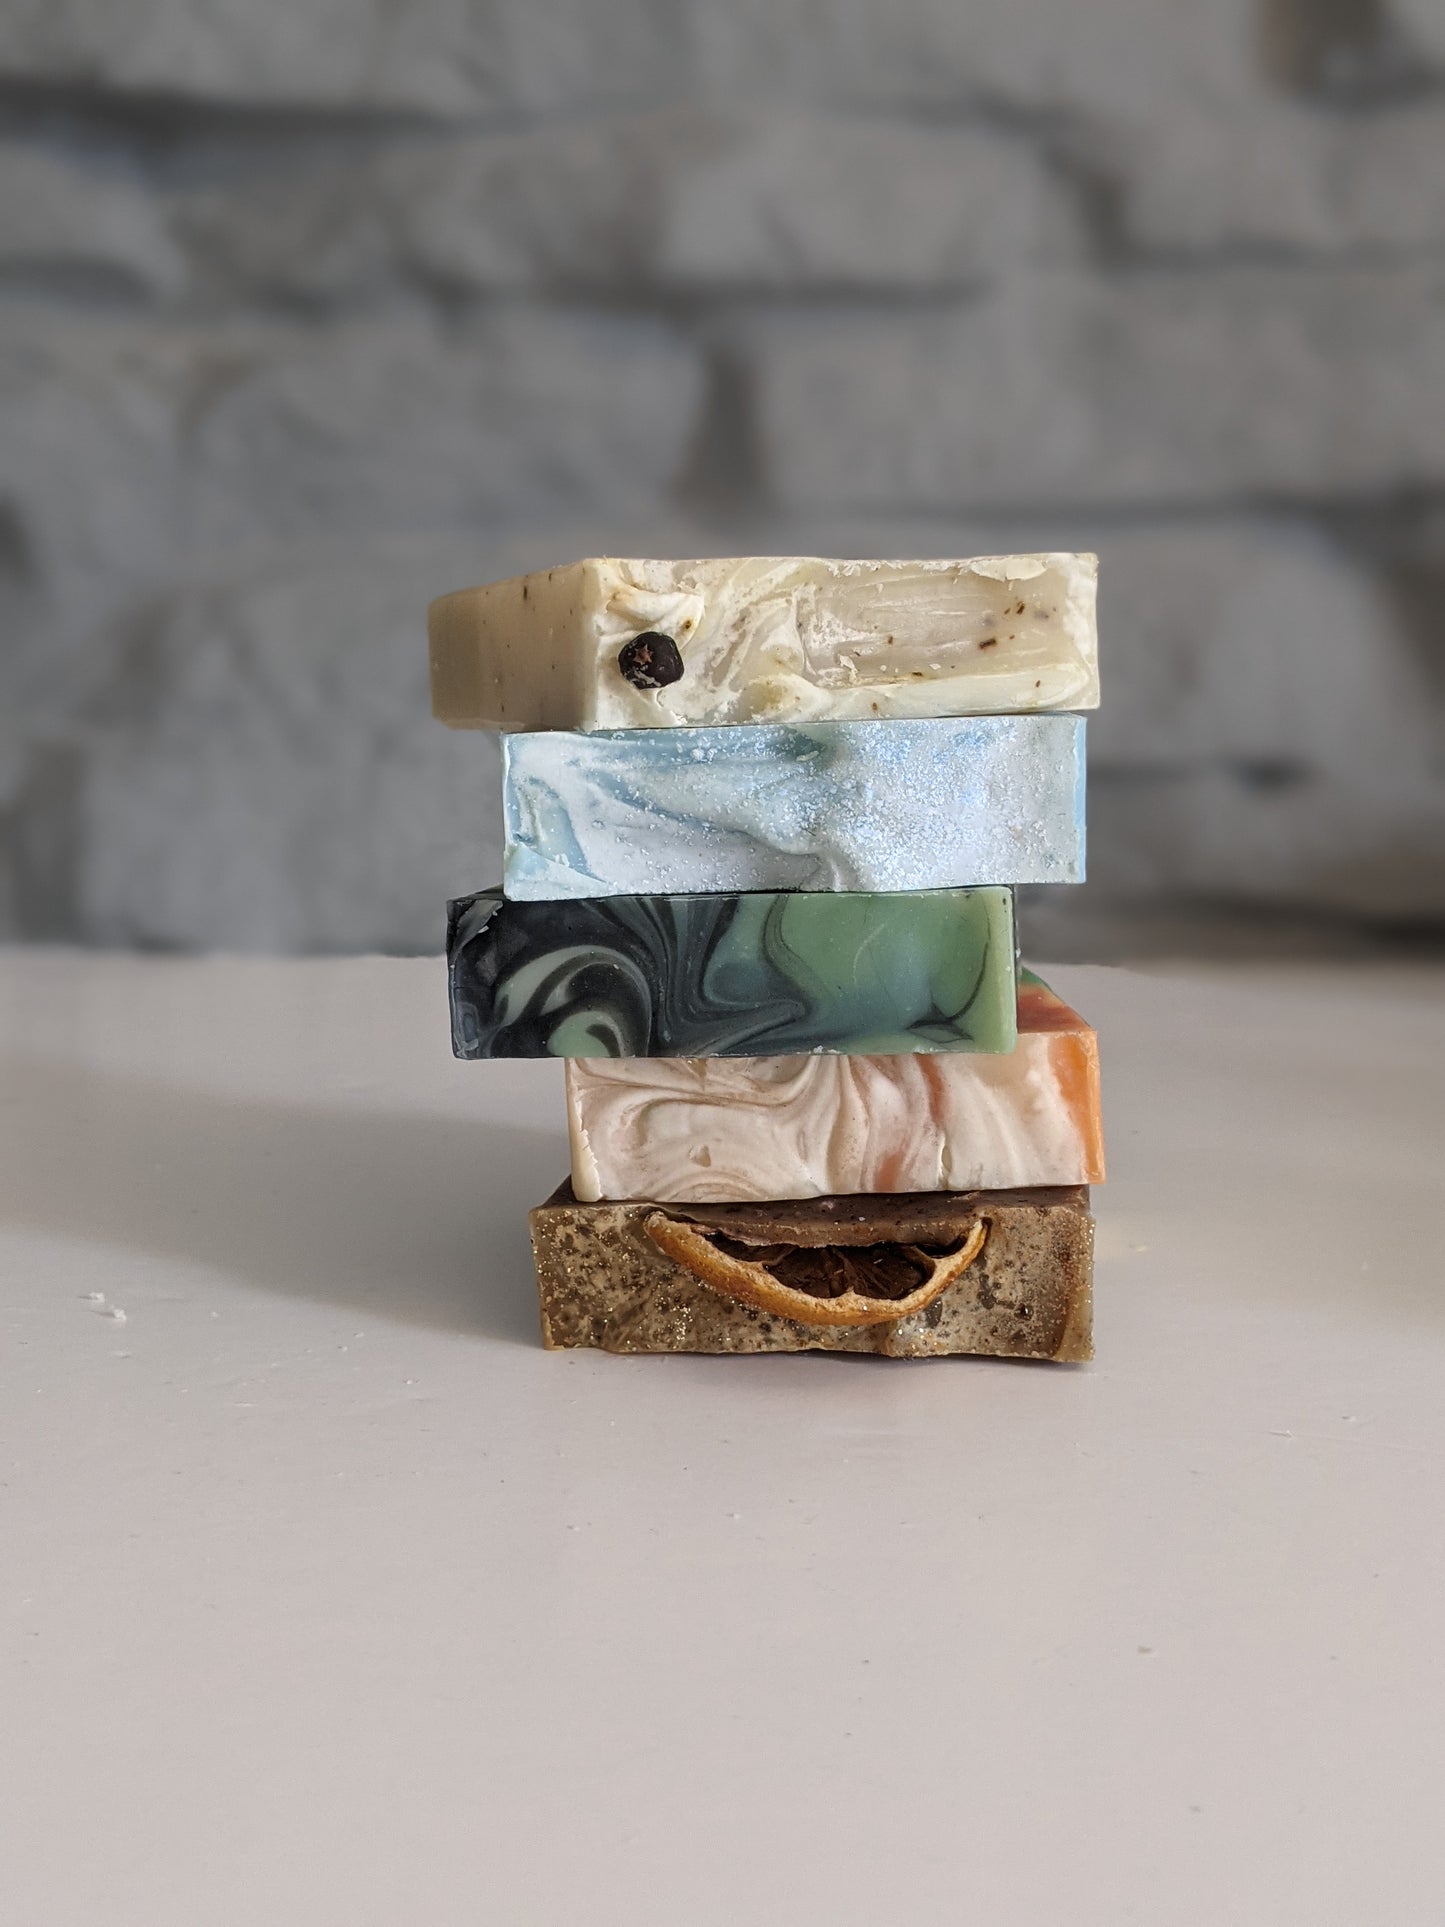 A stack of 5 different soaps on a white surface, against a grey brick background.